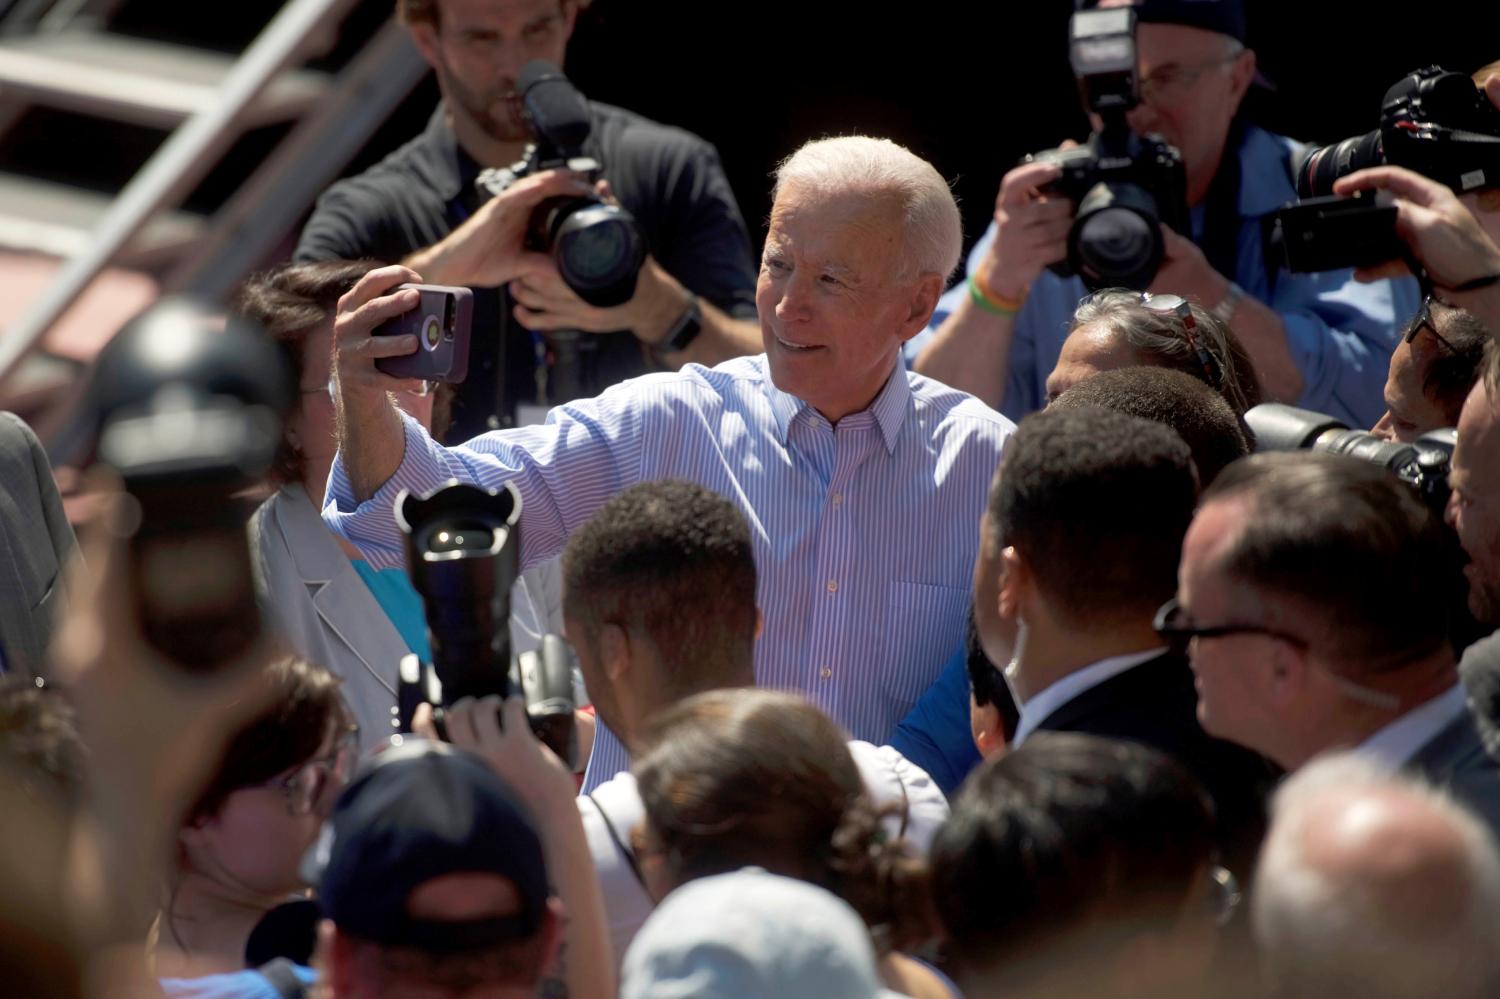 Democratic 2020 U.S. presidential candidate and former Vice President Joe Biden greets supporters after speaking during a campaign rally in Philadelphia, Pennsylvania, U.S., May 18, 2019. REUTERS/Mark Makela - RC18E1A0E4D0